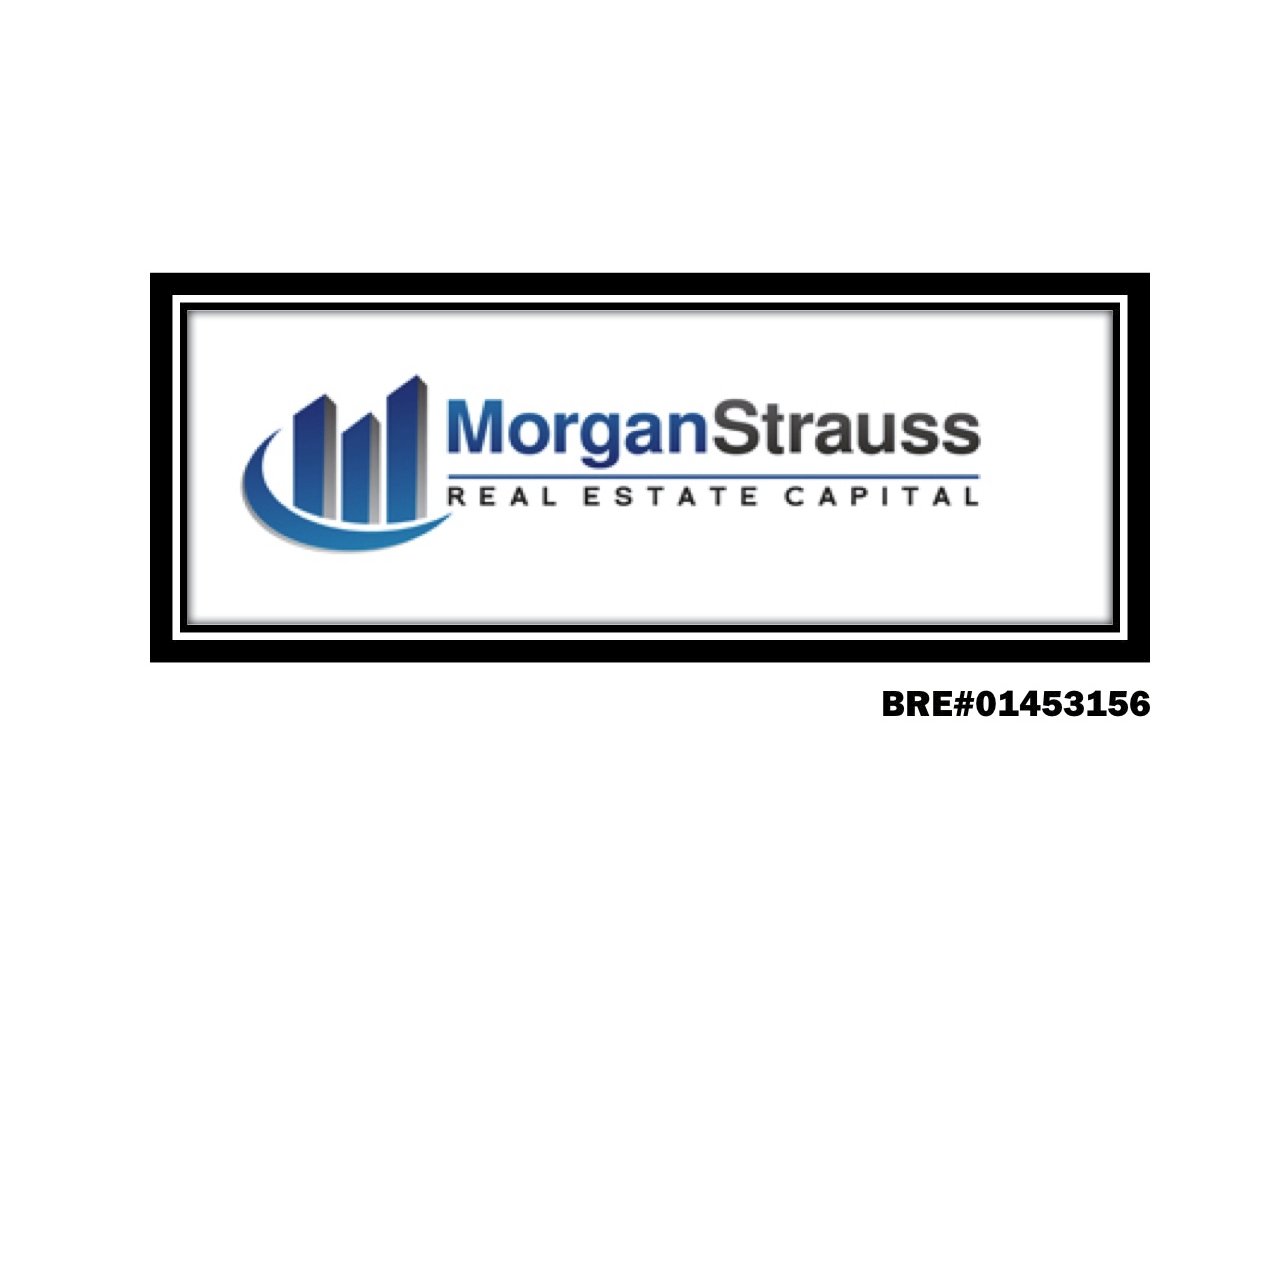 Morgan Strauss Capital Specializes in arranging funds for properties such as #cre #multifamily #mixeduse #construction #business #hardmoney #hotel #developments